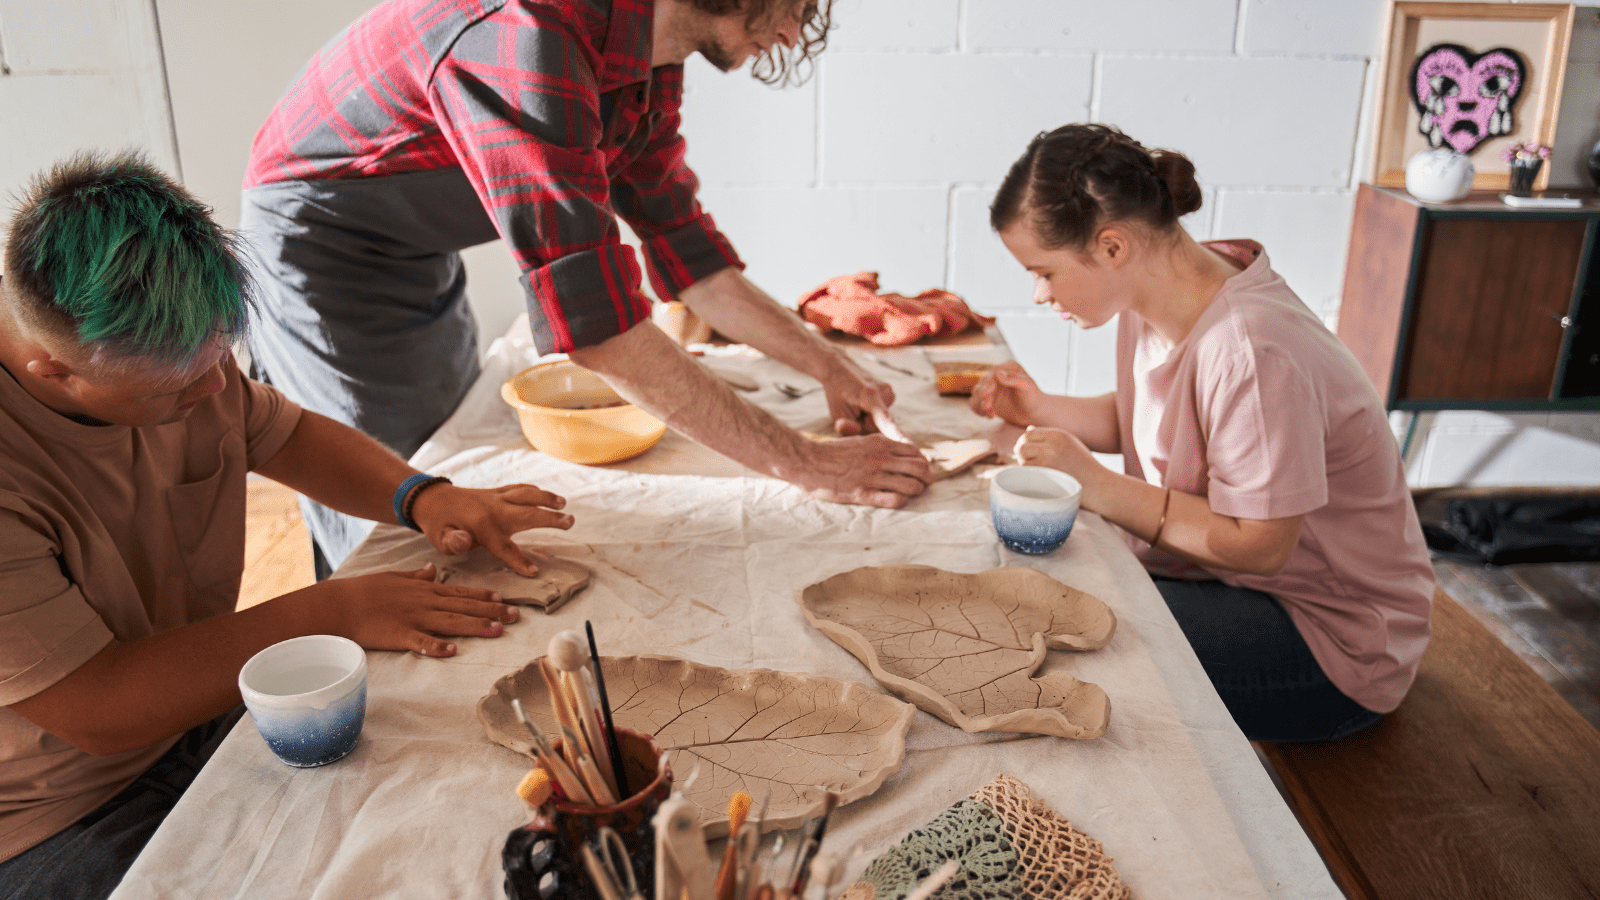 Two men and a woman work on clay projects around a table. They work with their hands and simple tools. Two clay pieces, shaped like giant leaves sit on the table.